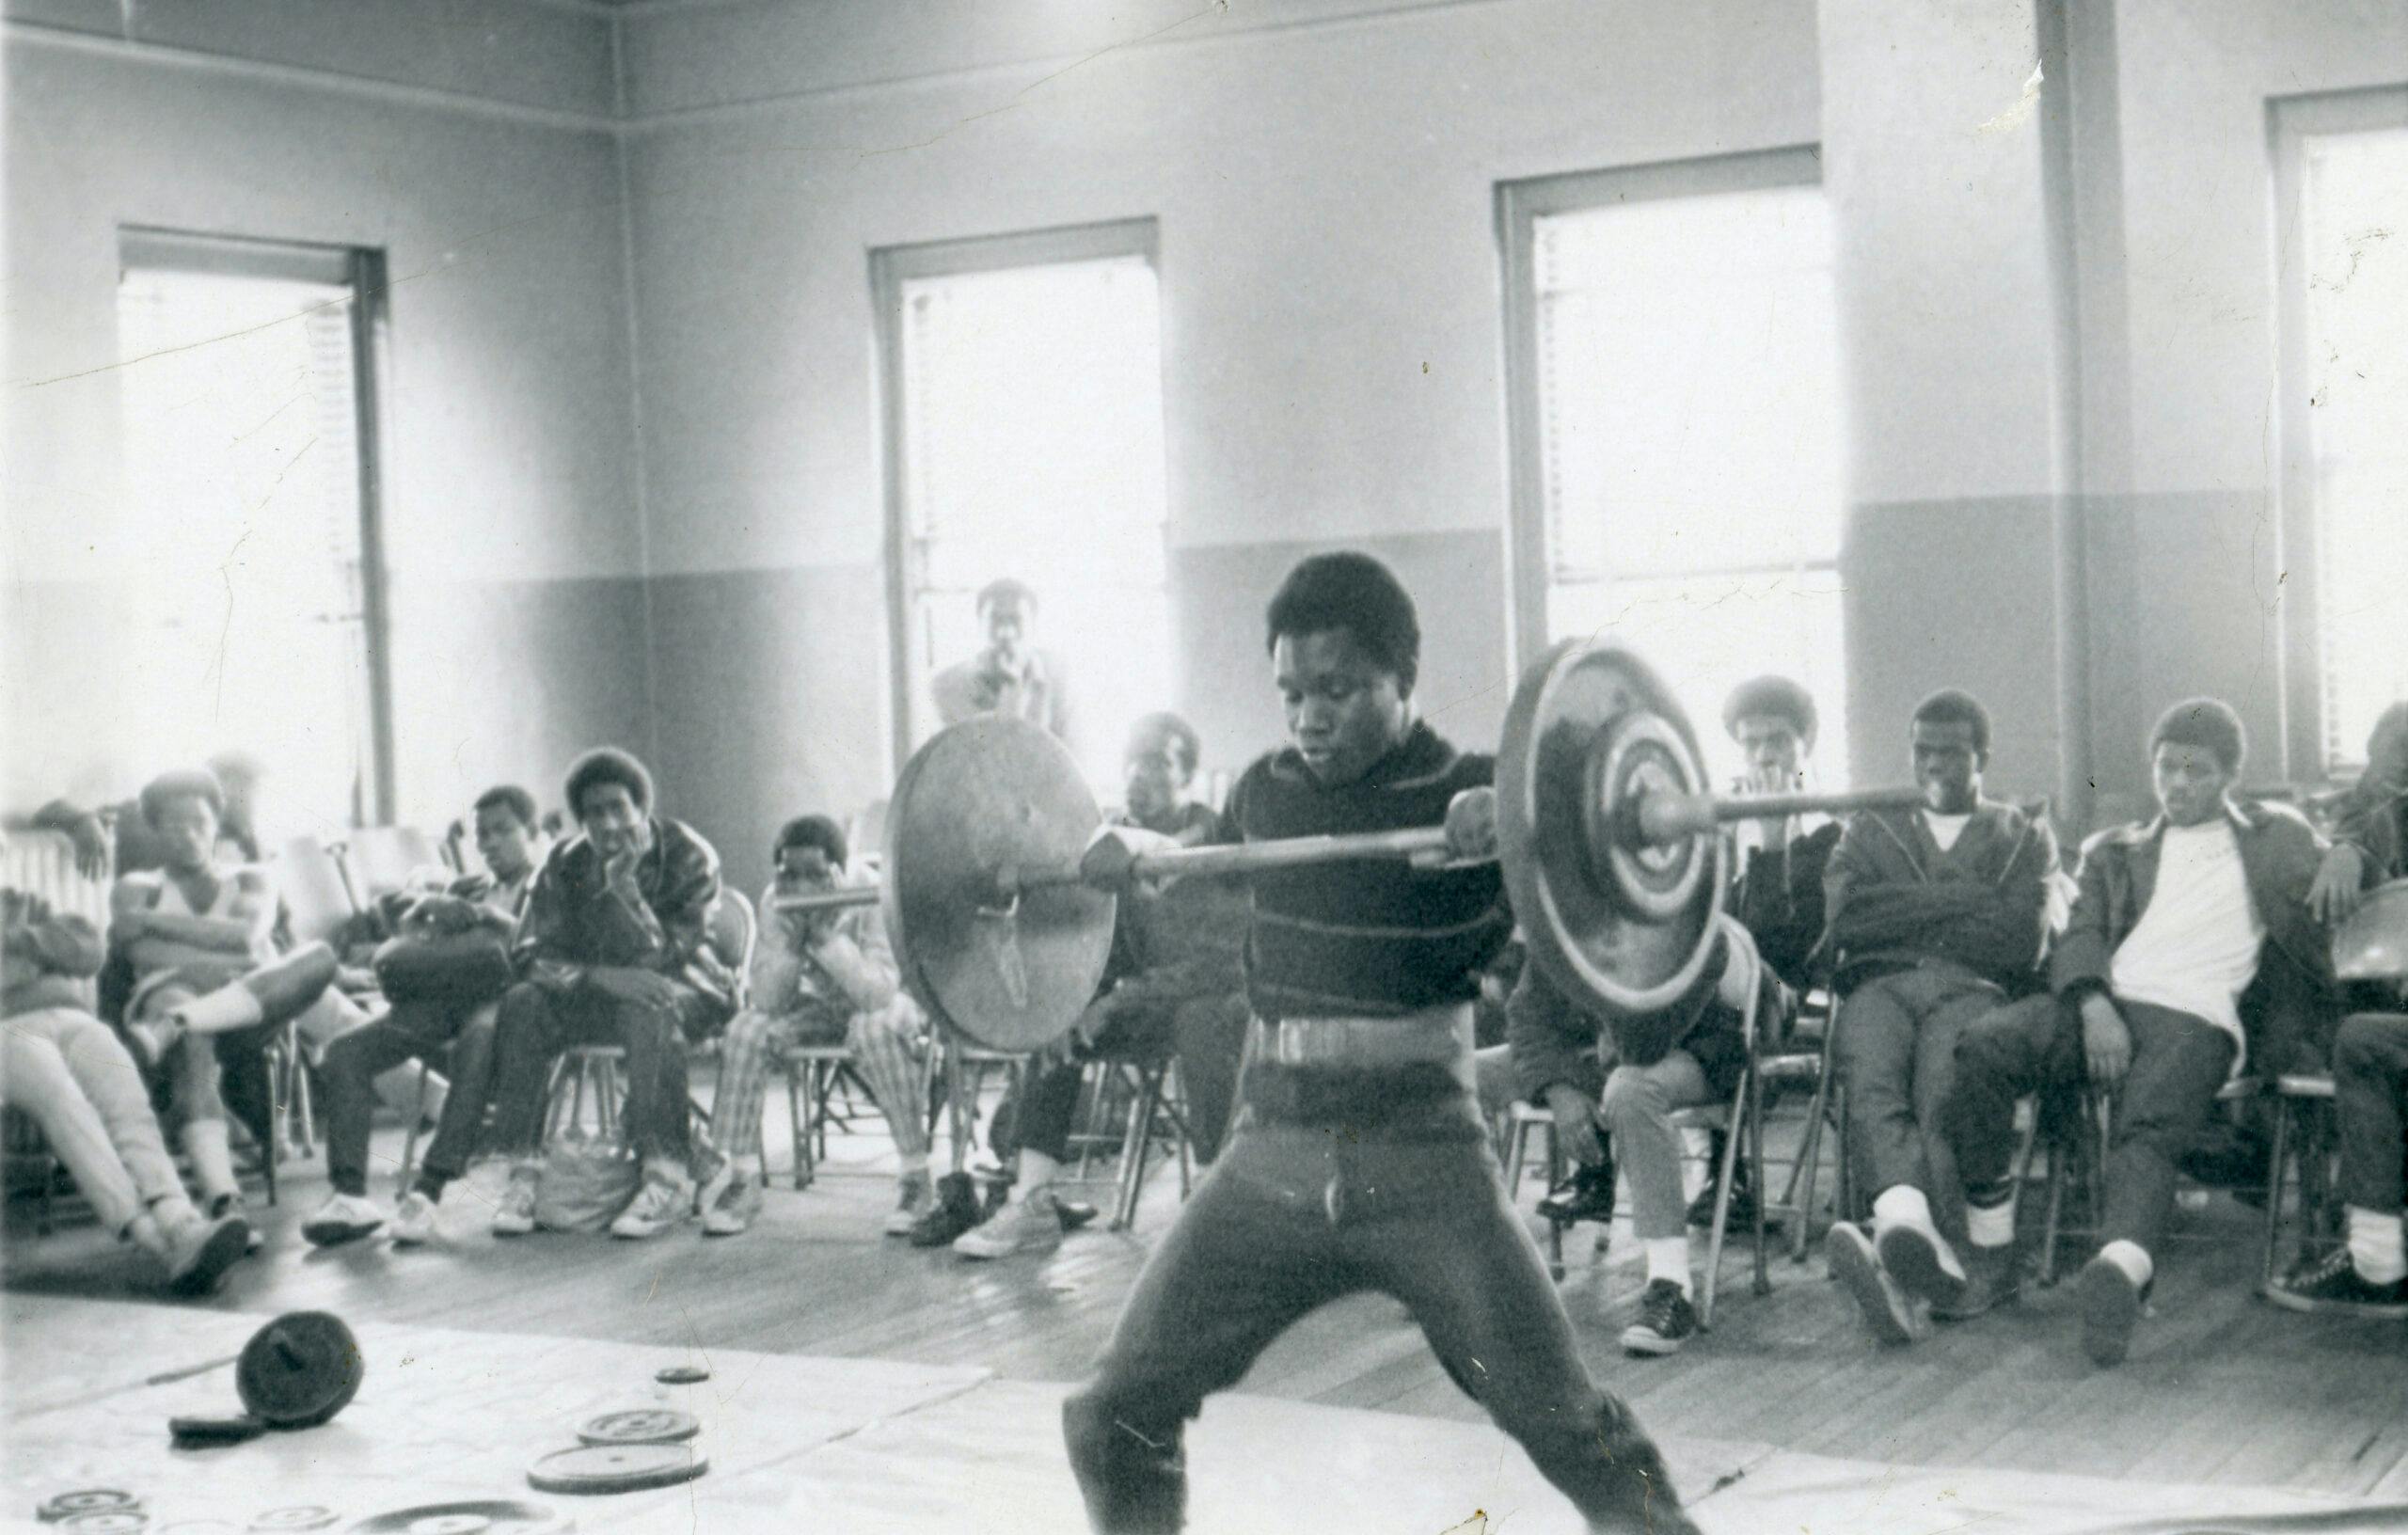 Photo of weightlifting inside the YMCA